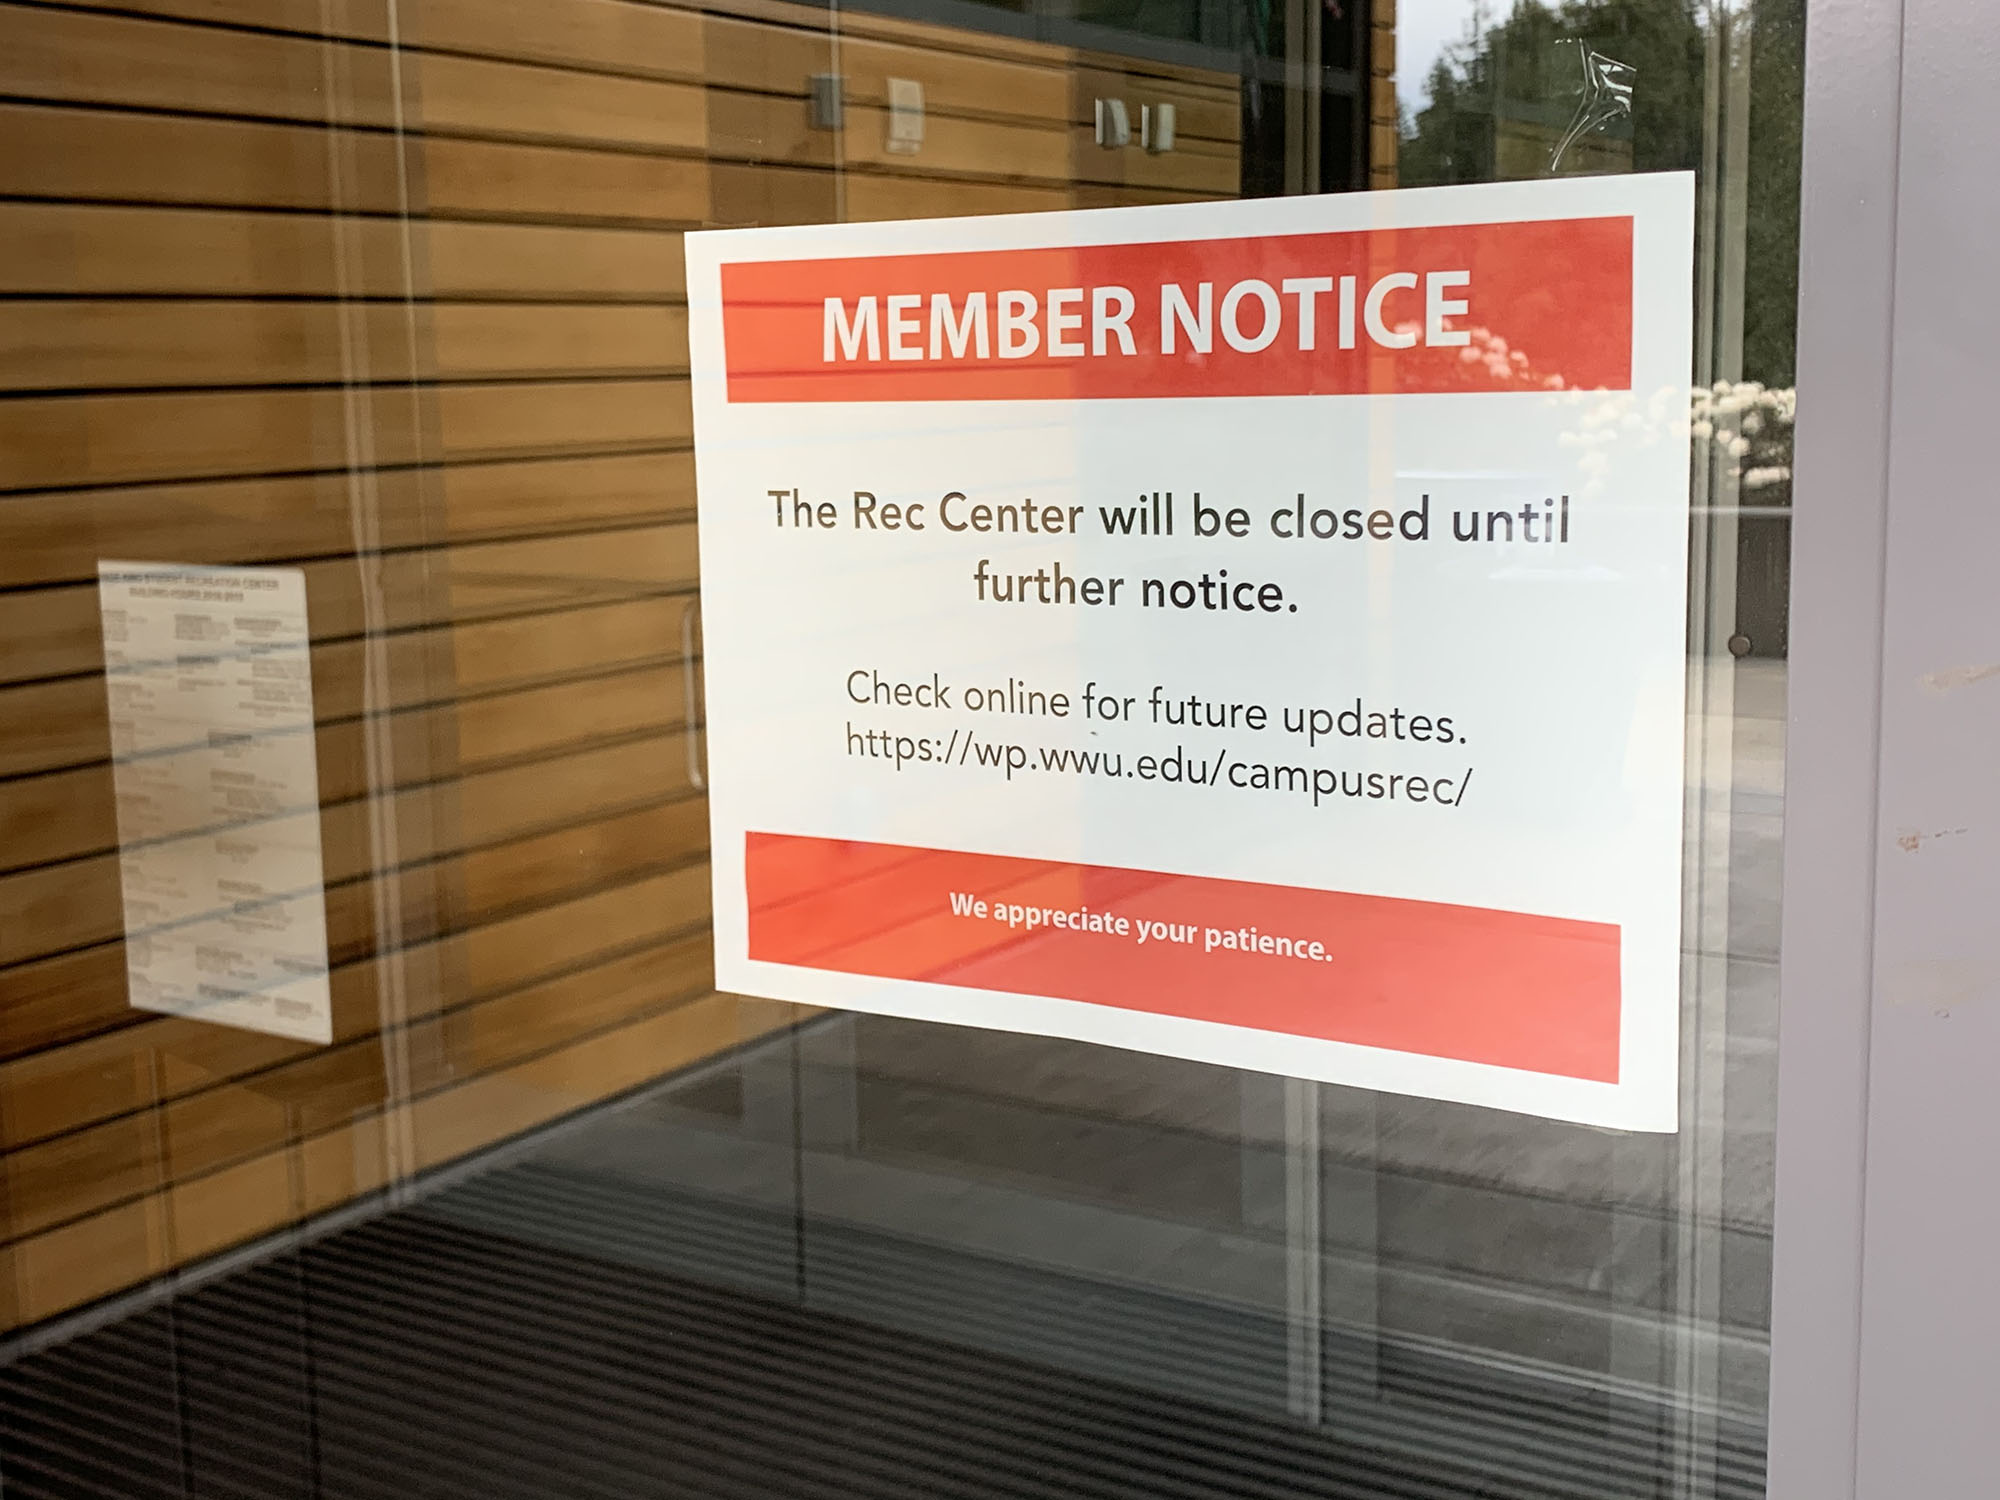 Image of Rec Center Notice, reads " The Rec Center will be closed until further notice. Check online for future updates. We appreciate your patience."